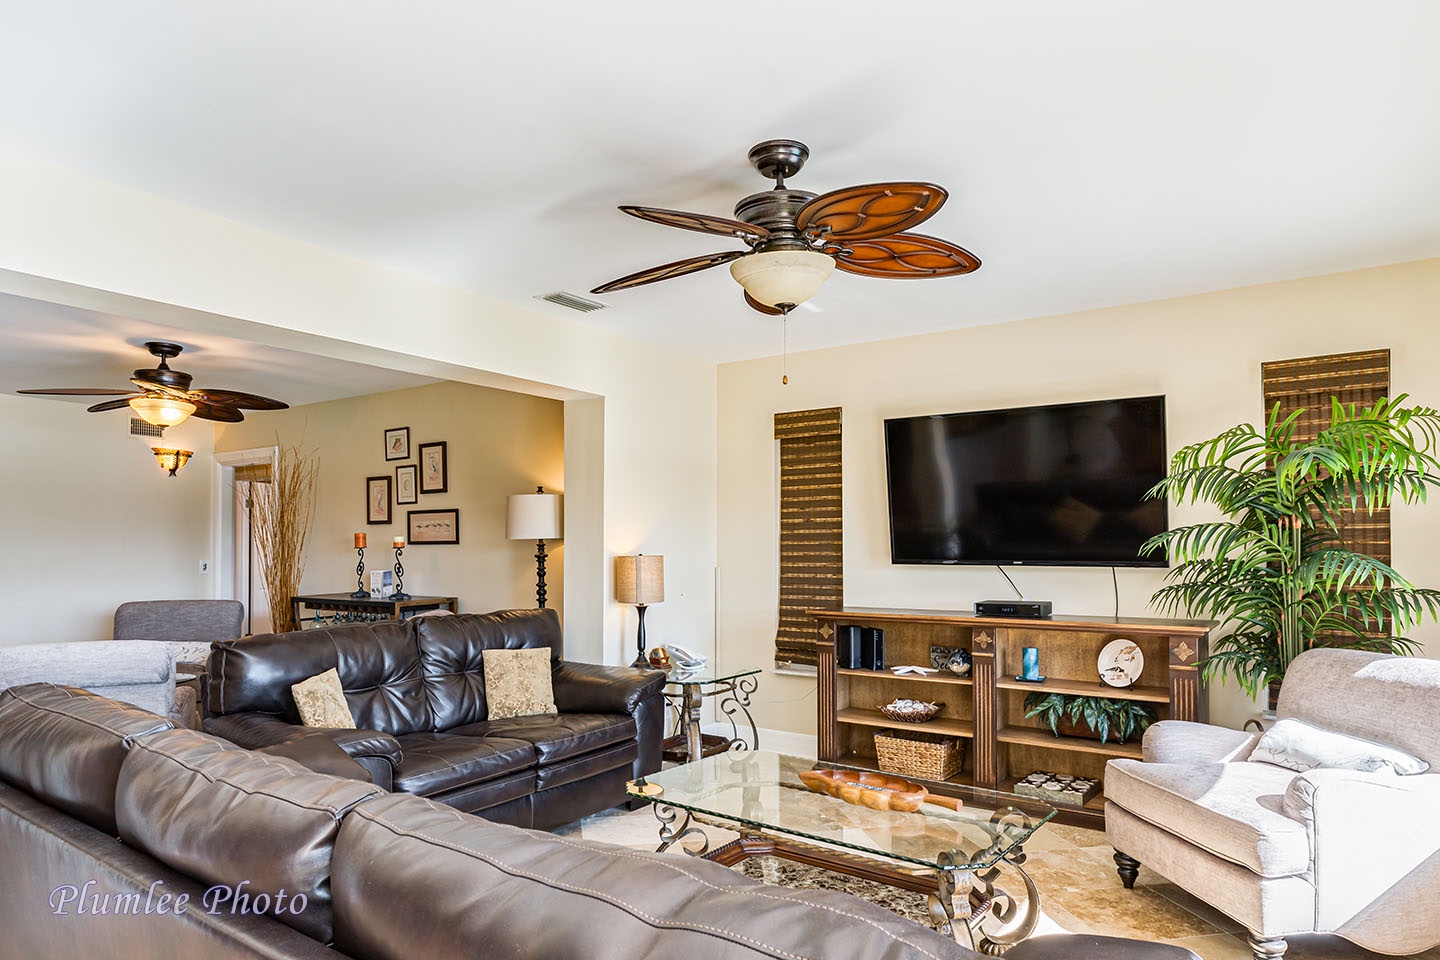 Large mounted TV and ceiling fan